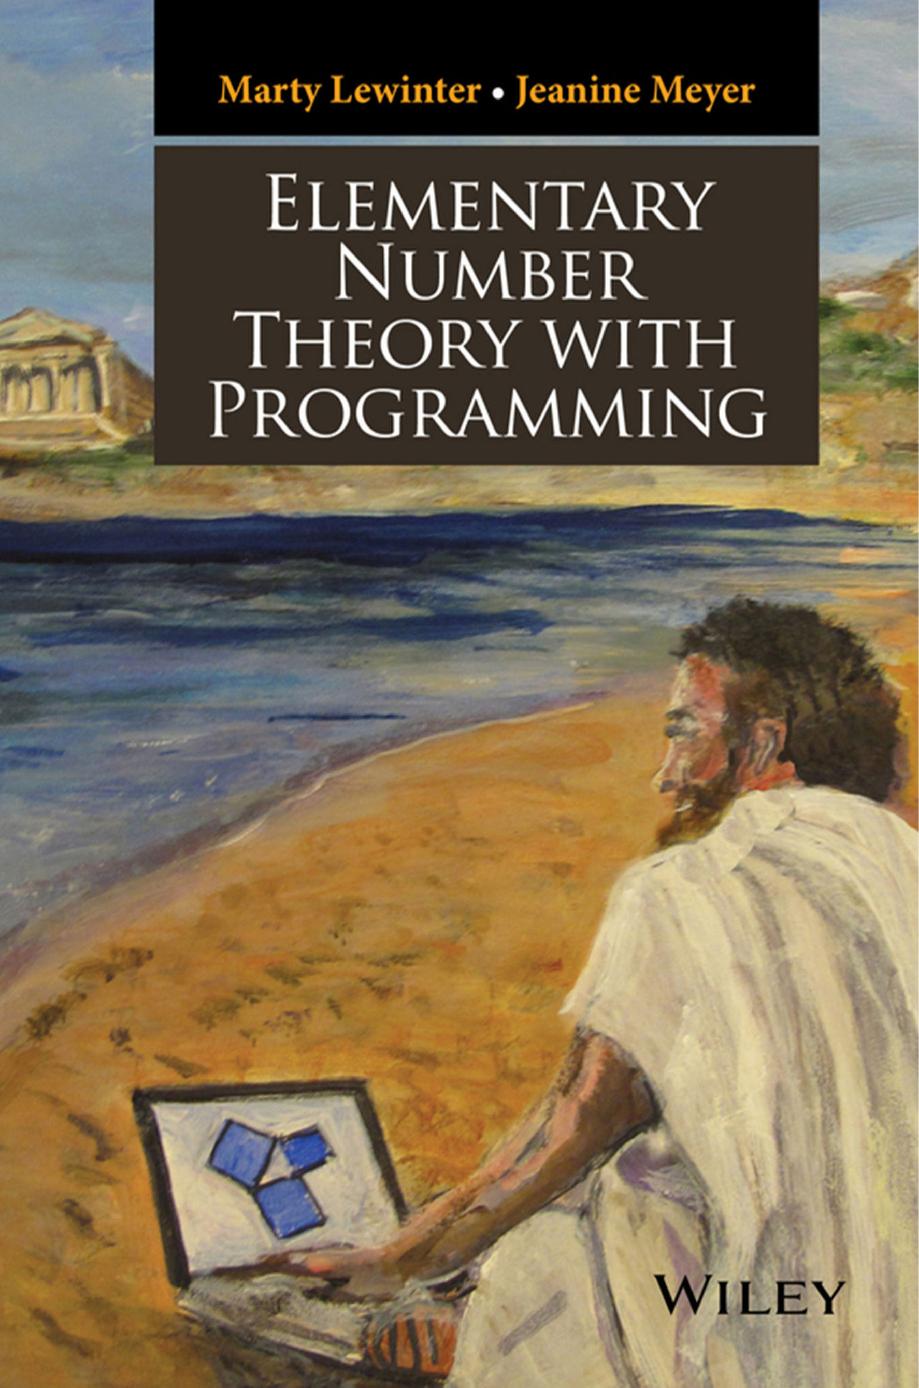 Elementary number theory with programming2016